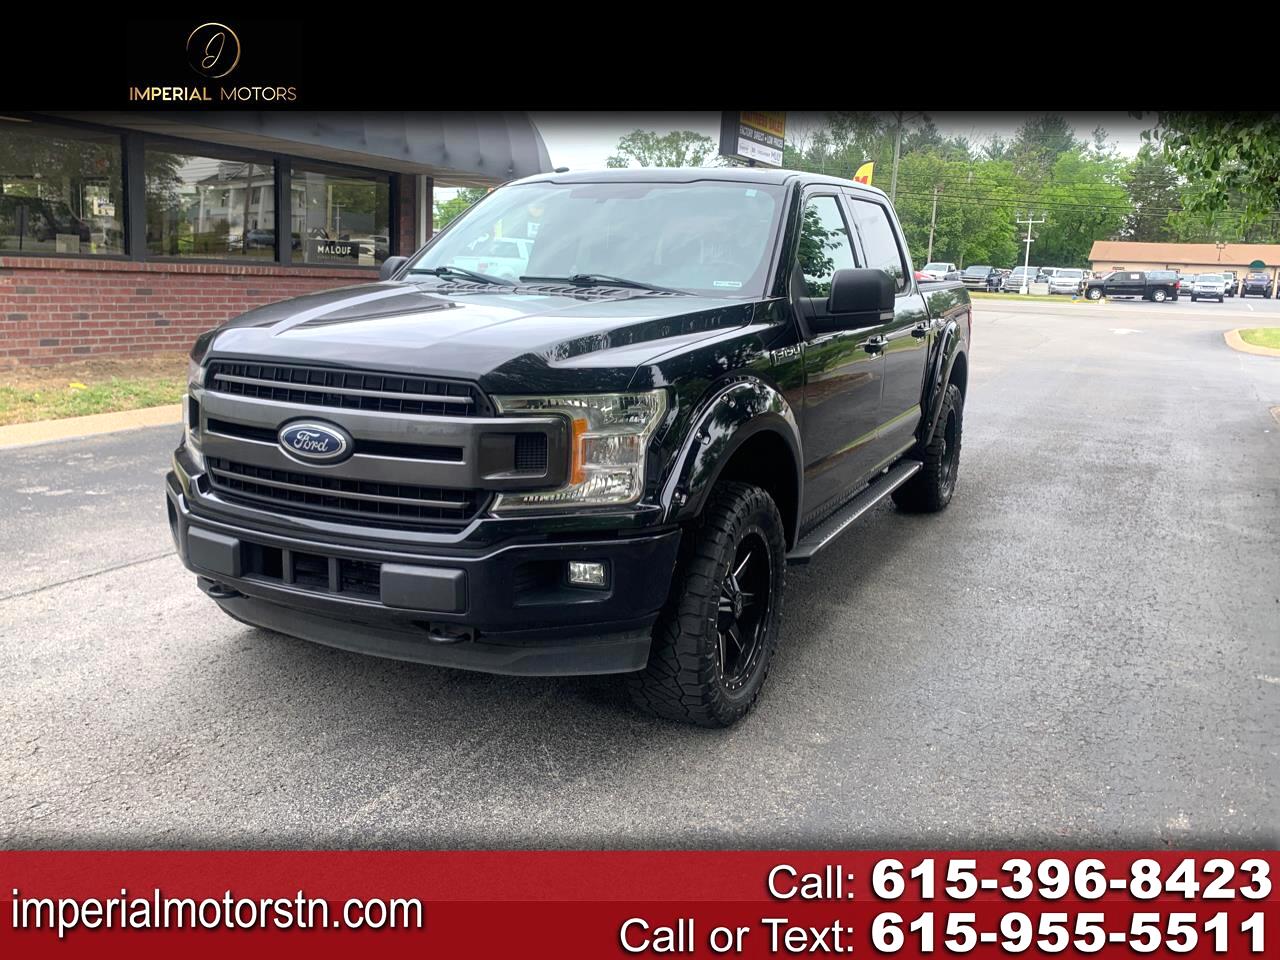 2018 Ford F-150 4WD SuperCrew 139" FX4